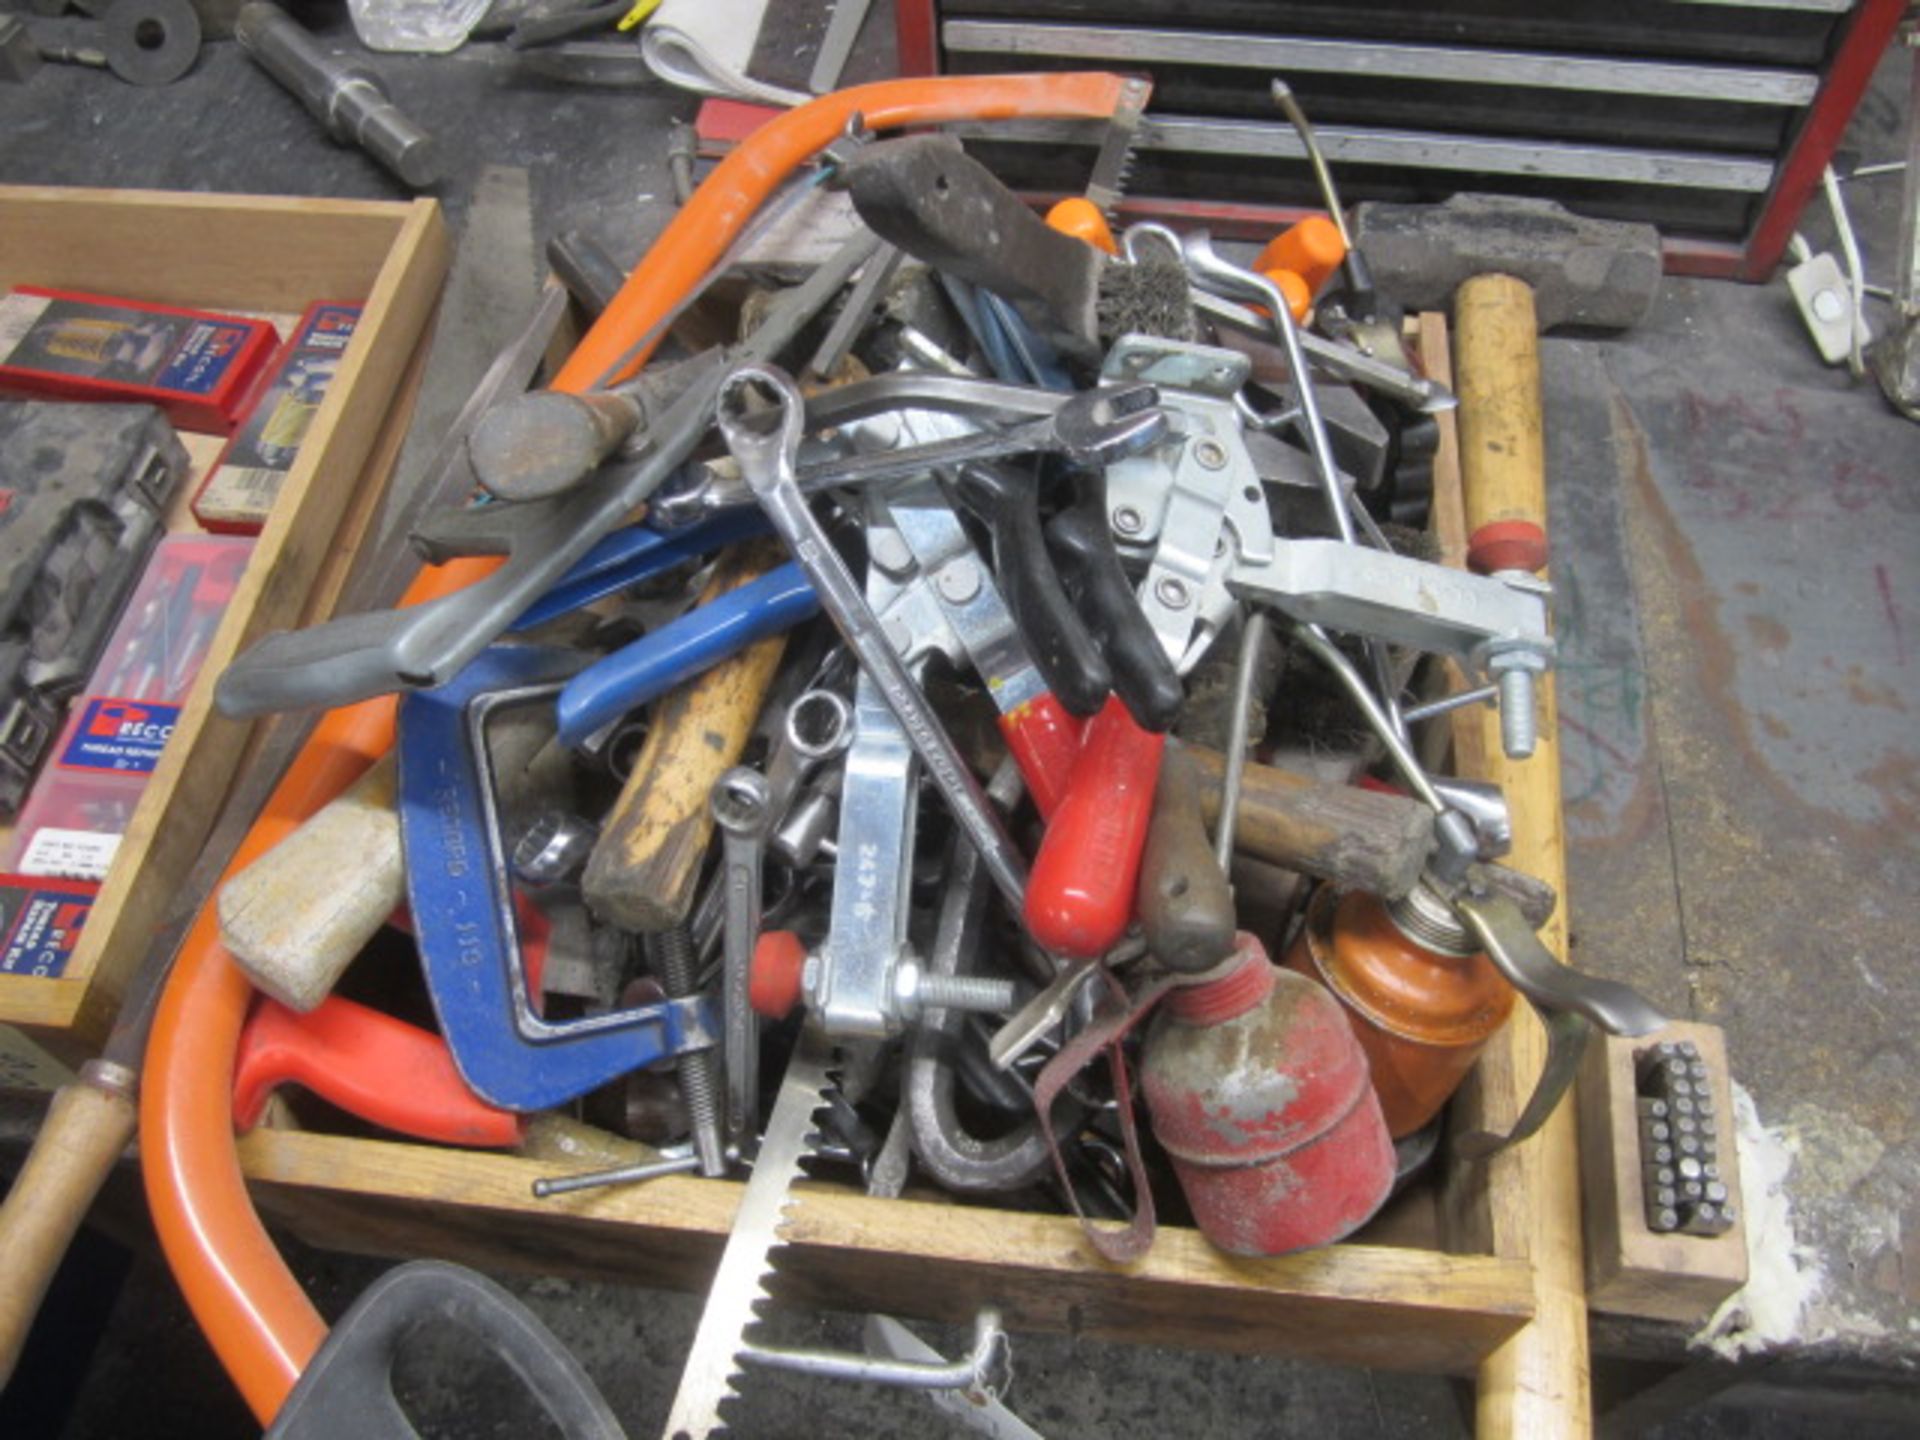 Quantity of hand tools including spanners, mallets, hacksaw, screw drivers, oil cans, sledge hammer,